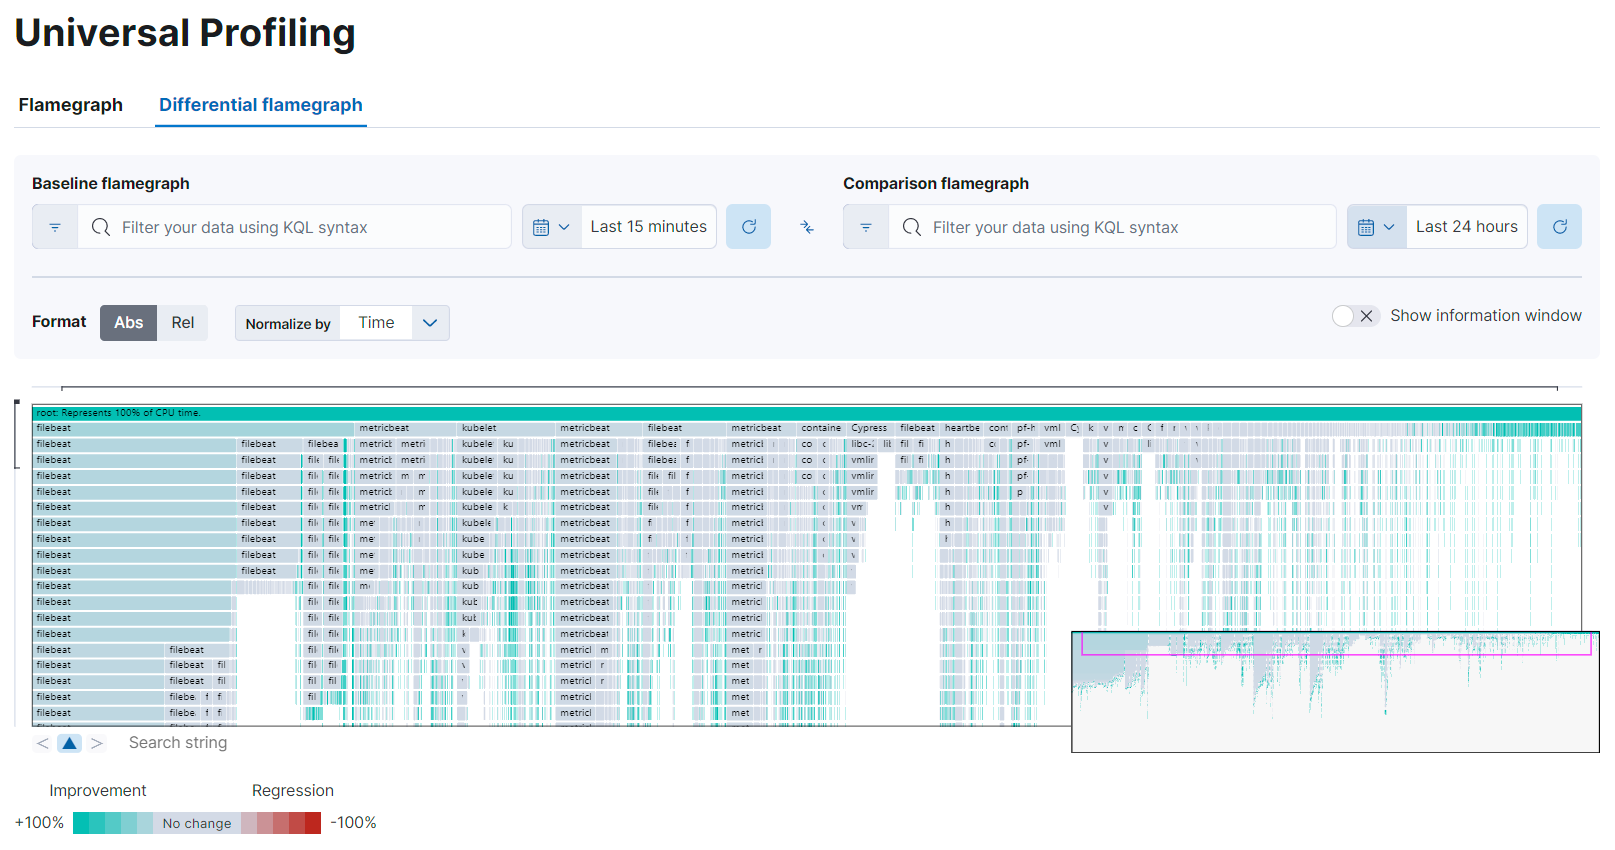 profiling flamegraph differential view